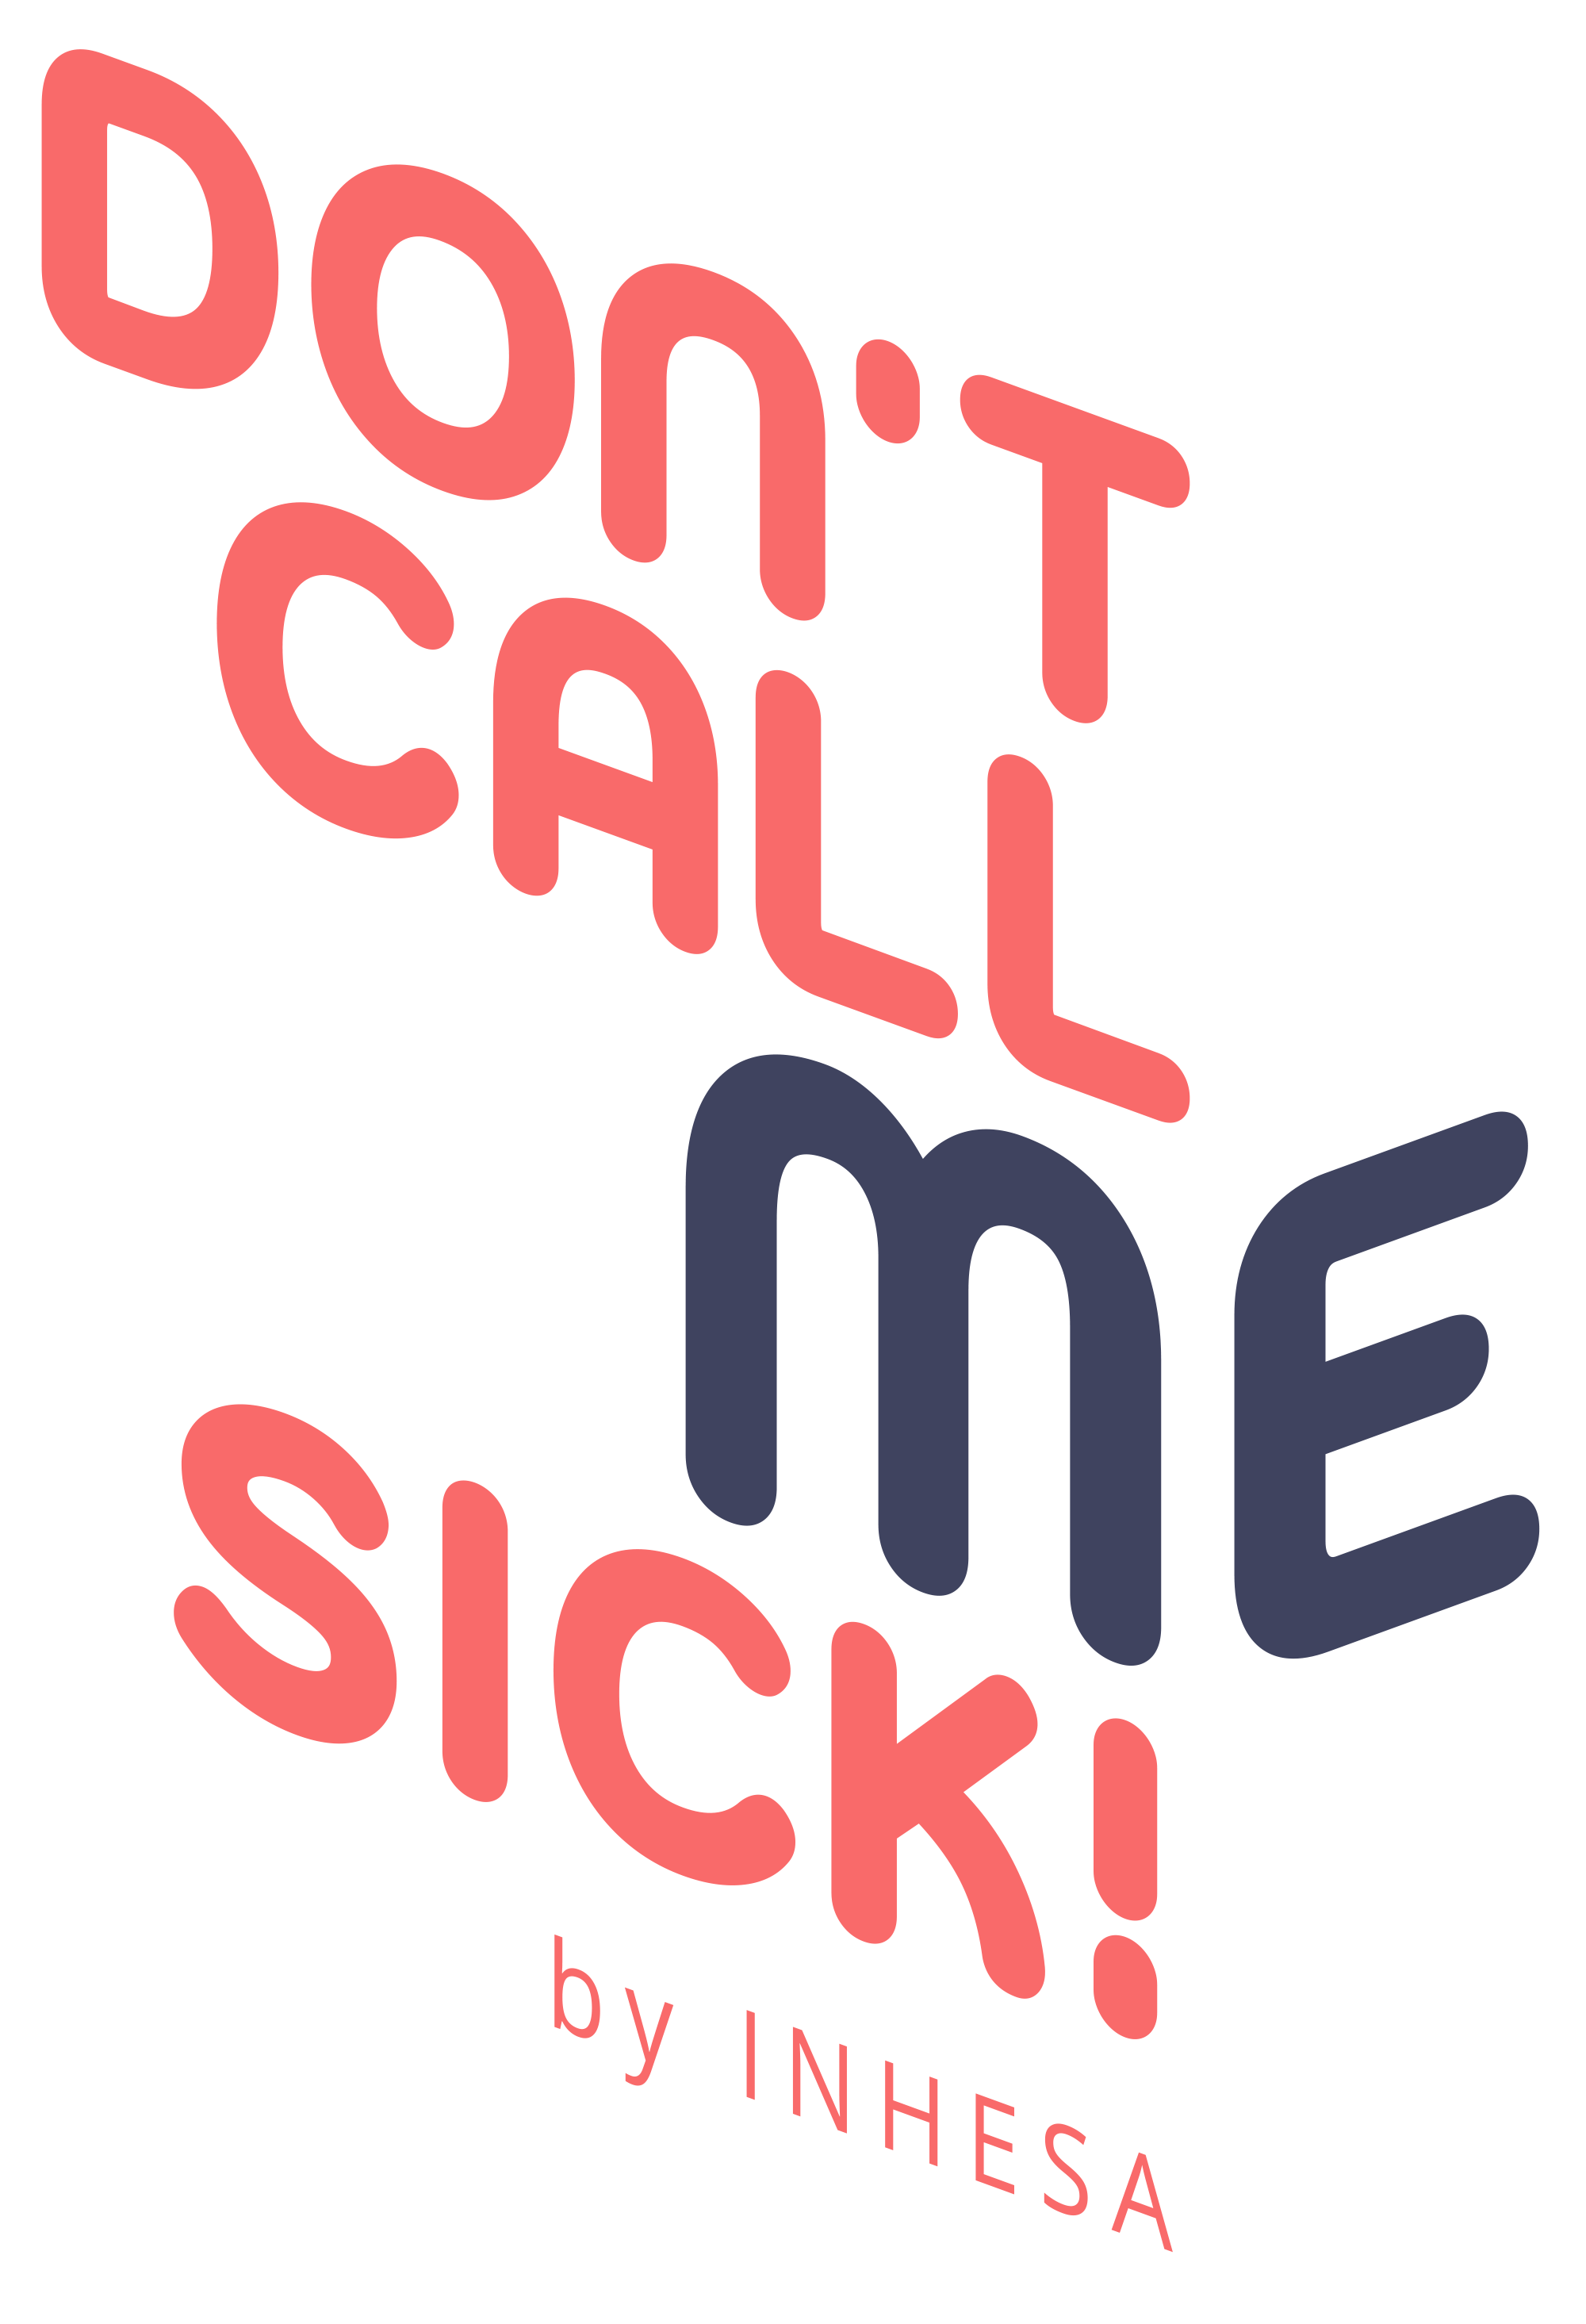 Don't Call Me Sick by INHESA® Logo